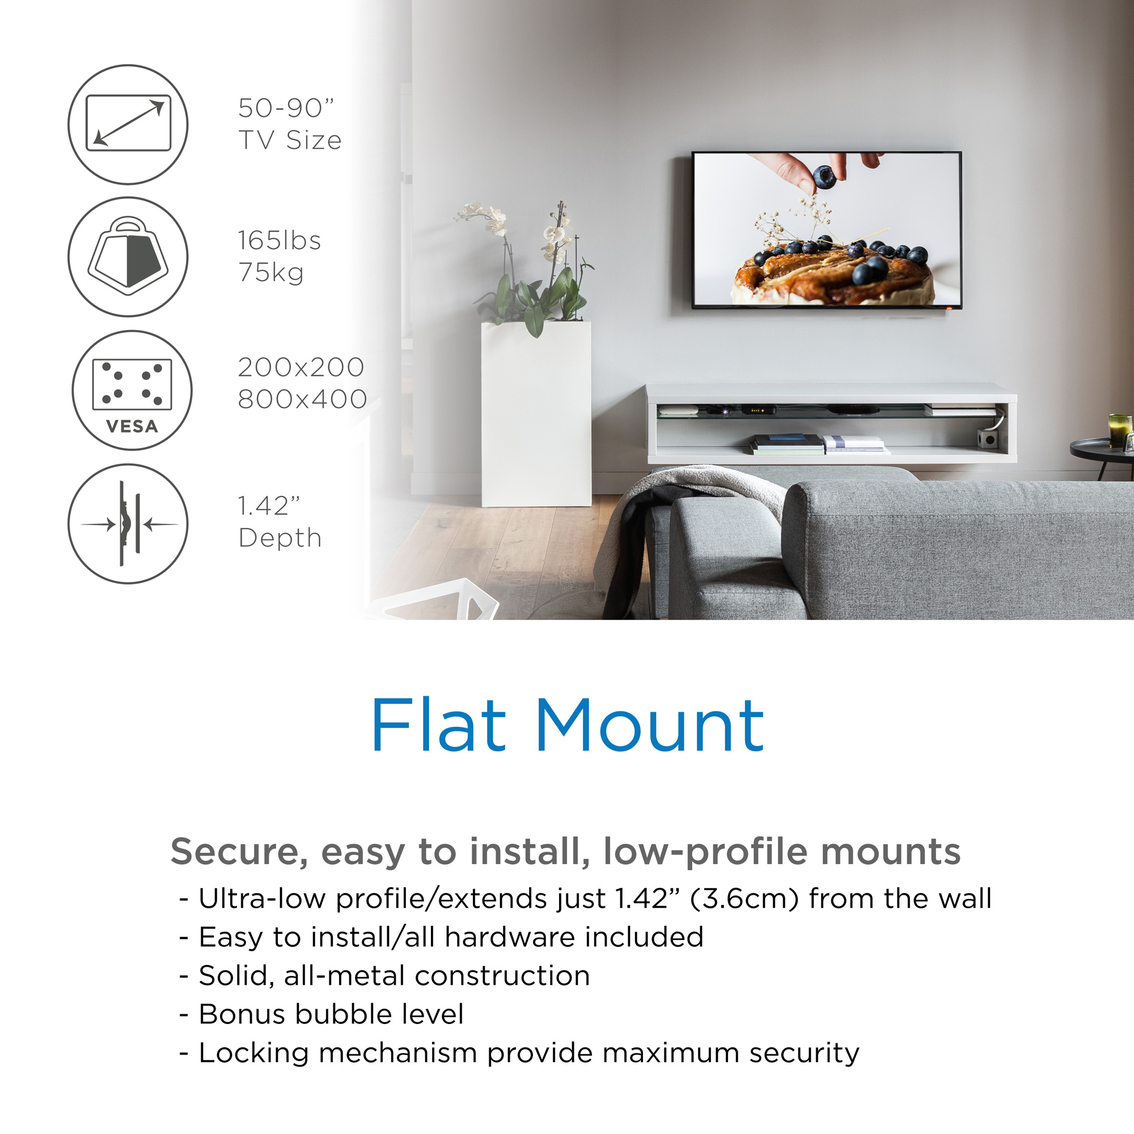 ProMounts Low Profile Fixed TV Wall Mount for 50 - 90 in. TVs Up to 165 lbs. - Image 5 of 9